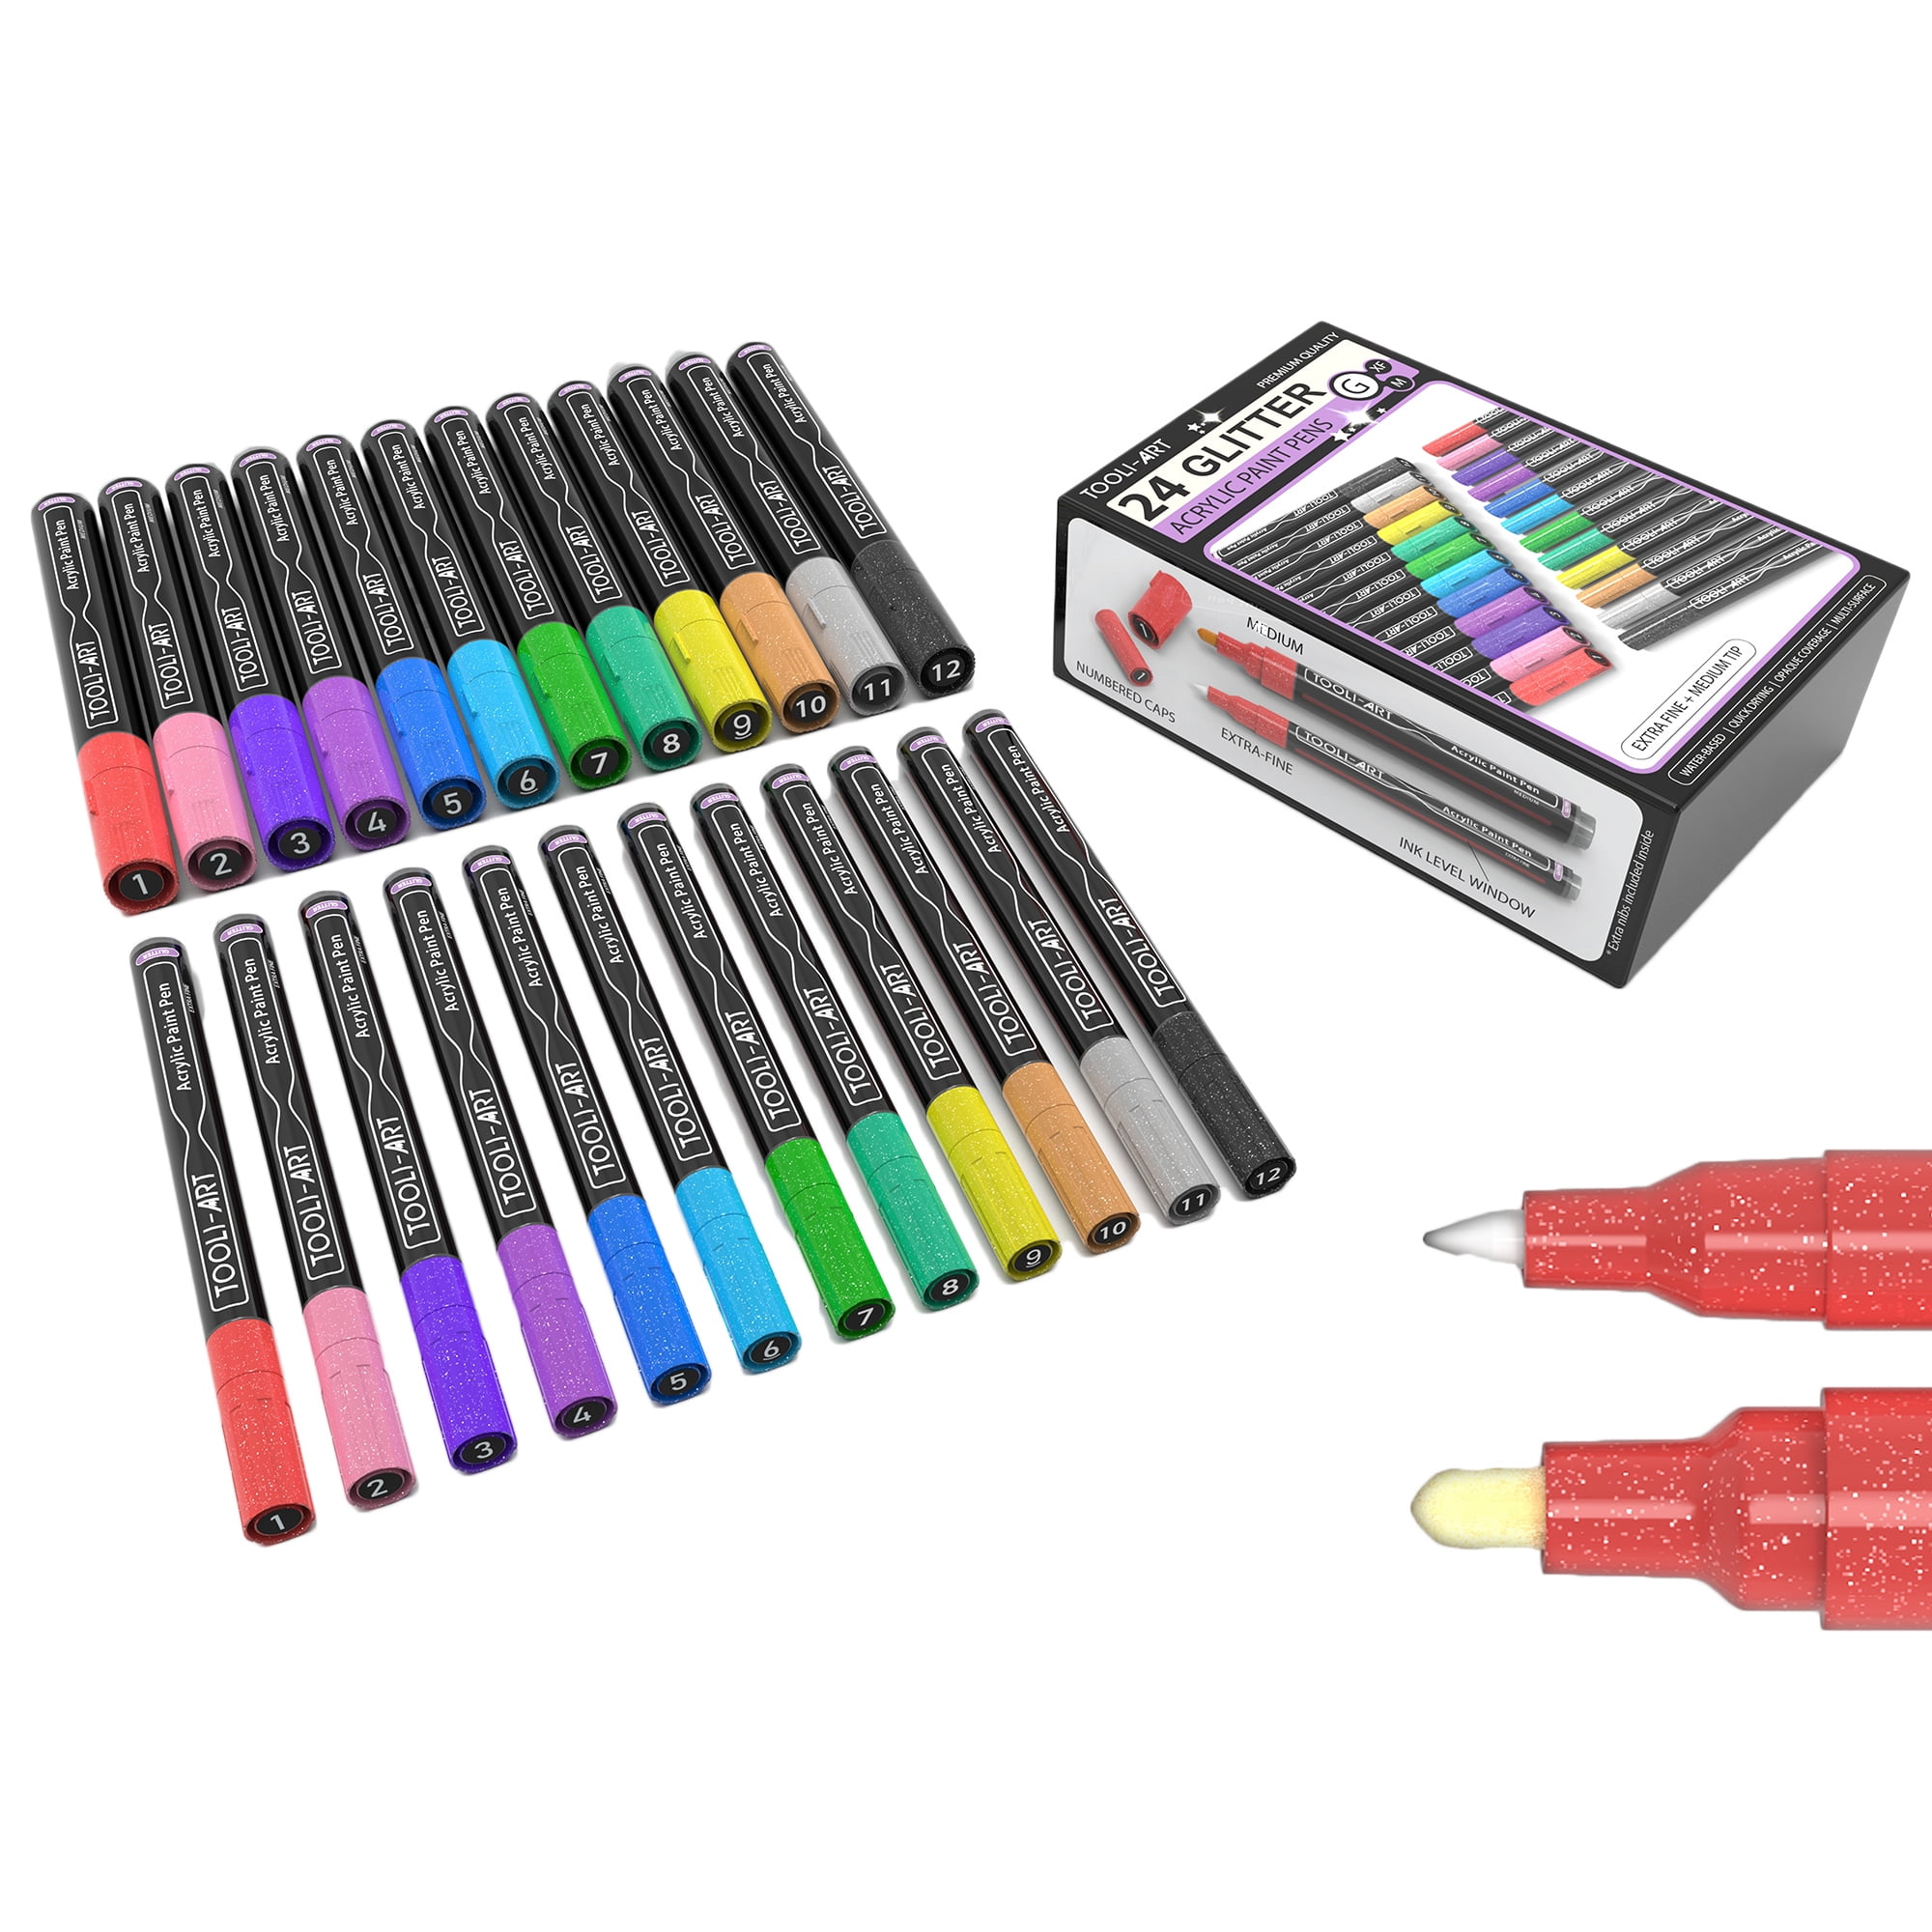 Tooli-Art Metallic Acrylic Paint Pens Marker Set for Rocks, Glass, Mugs,  and Most Surfaces with 0.7mm Extra Fine And 3.0mm Medium Tip Combo Marker  Set